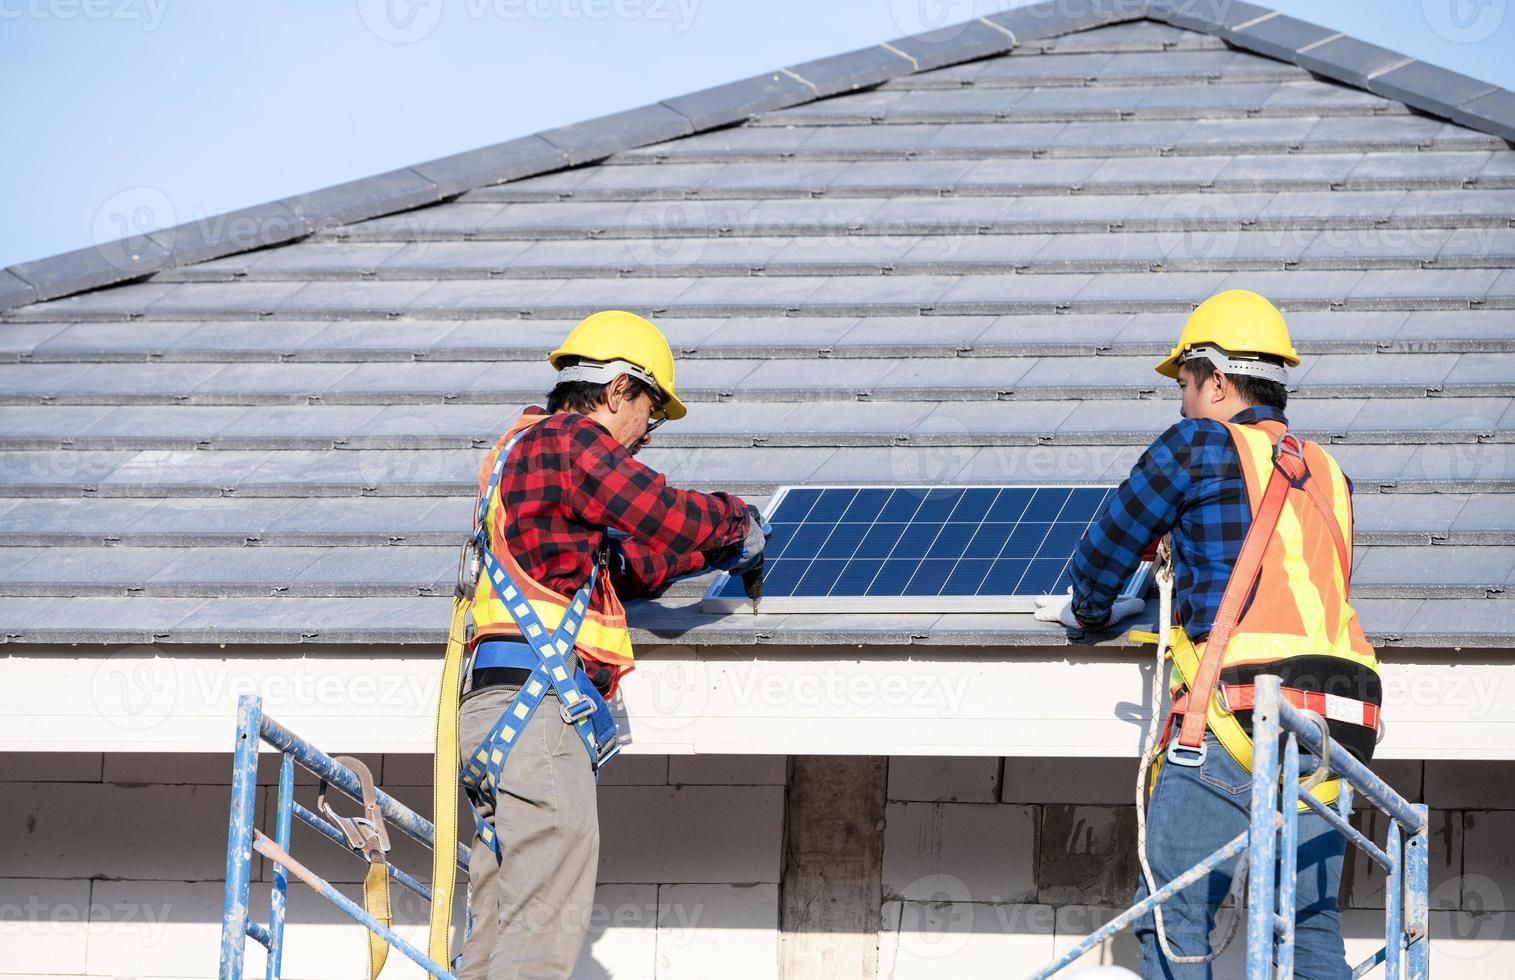 A team of Asian technicians installs solar panels on the roof of a house. Cross-section view of builder in helmet installing solar panel system concept of renewable energy photo